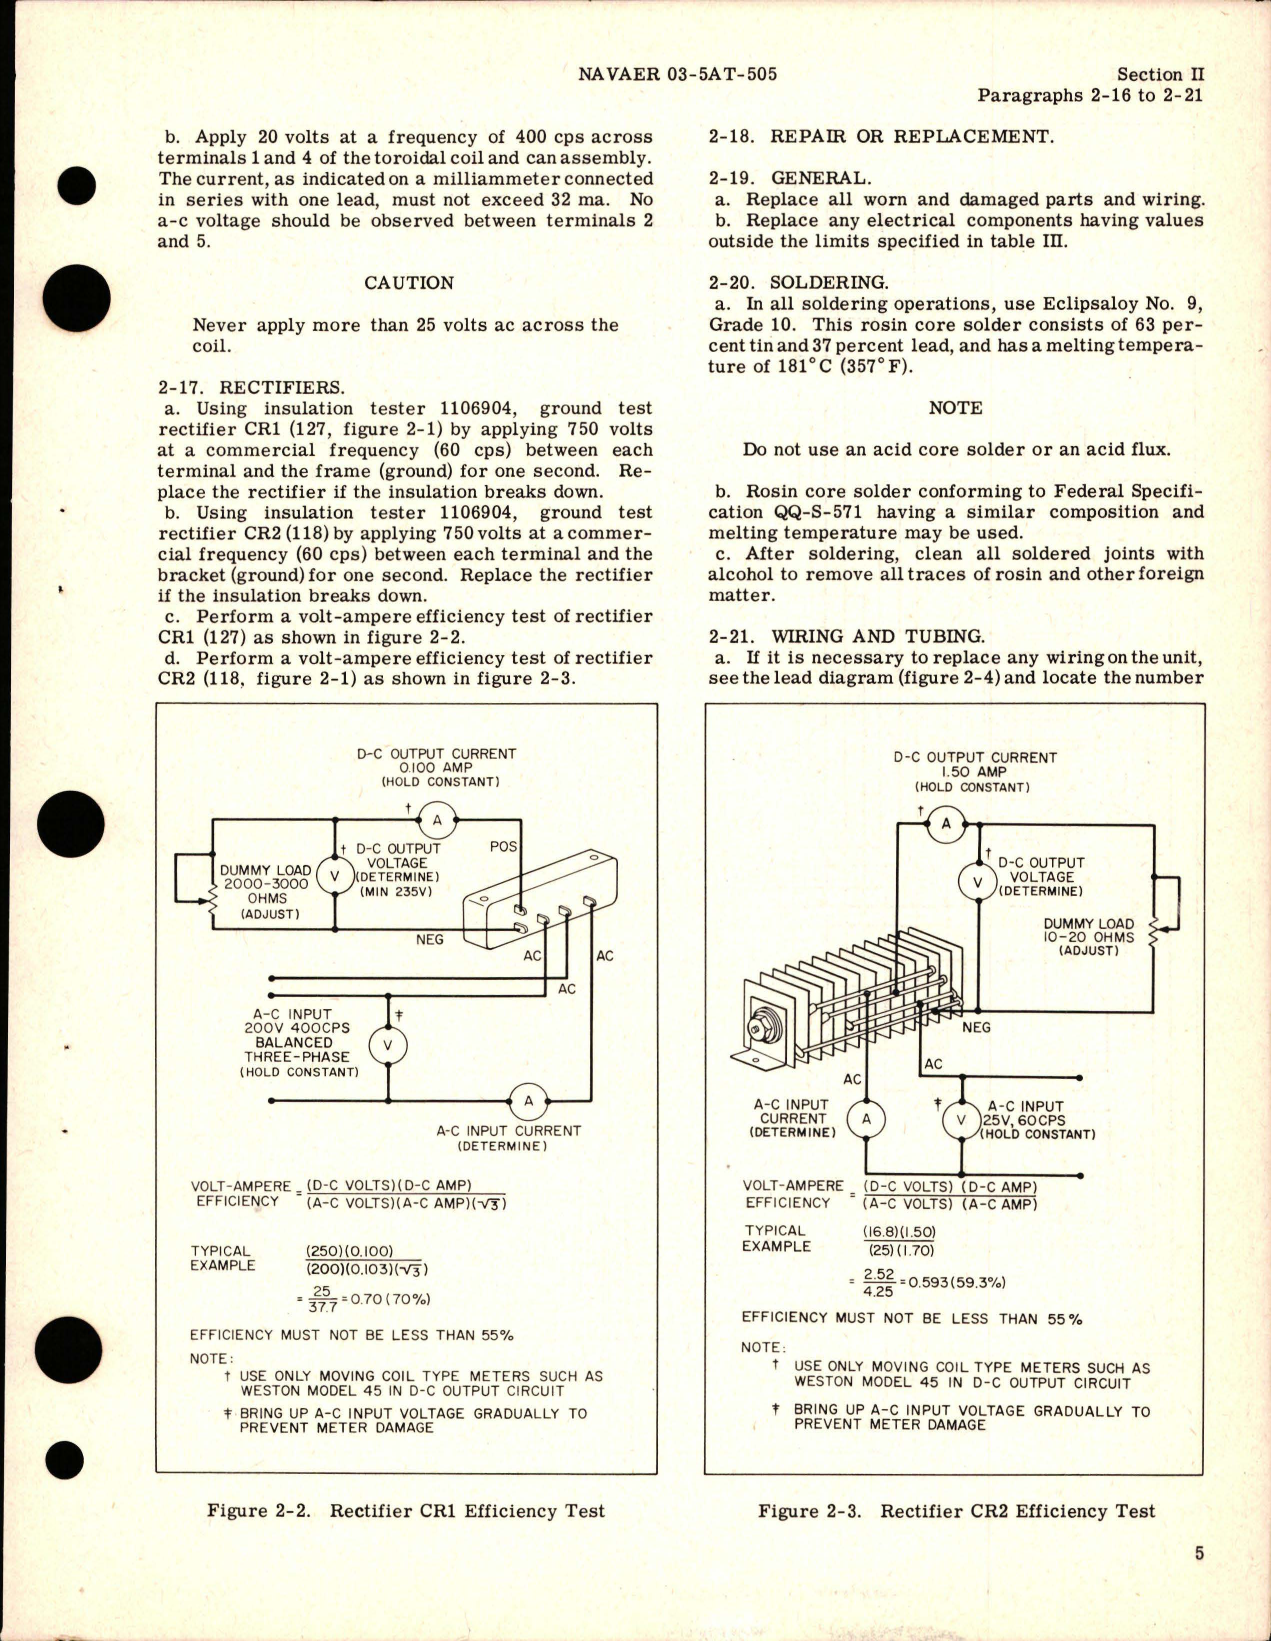 Sample page 9 from AirCorps Library document: Overhaul Instructions for Voltage Regulator 